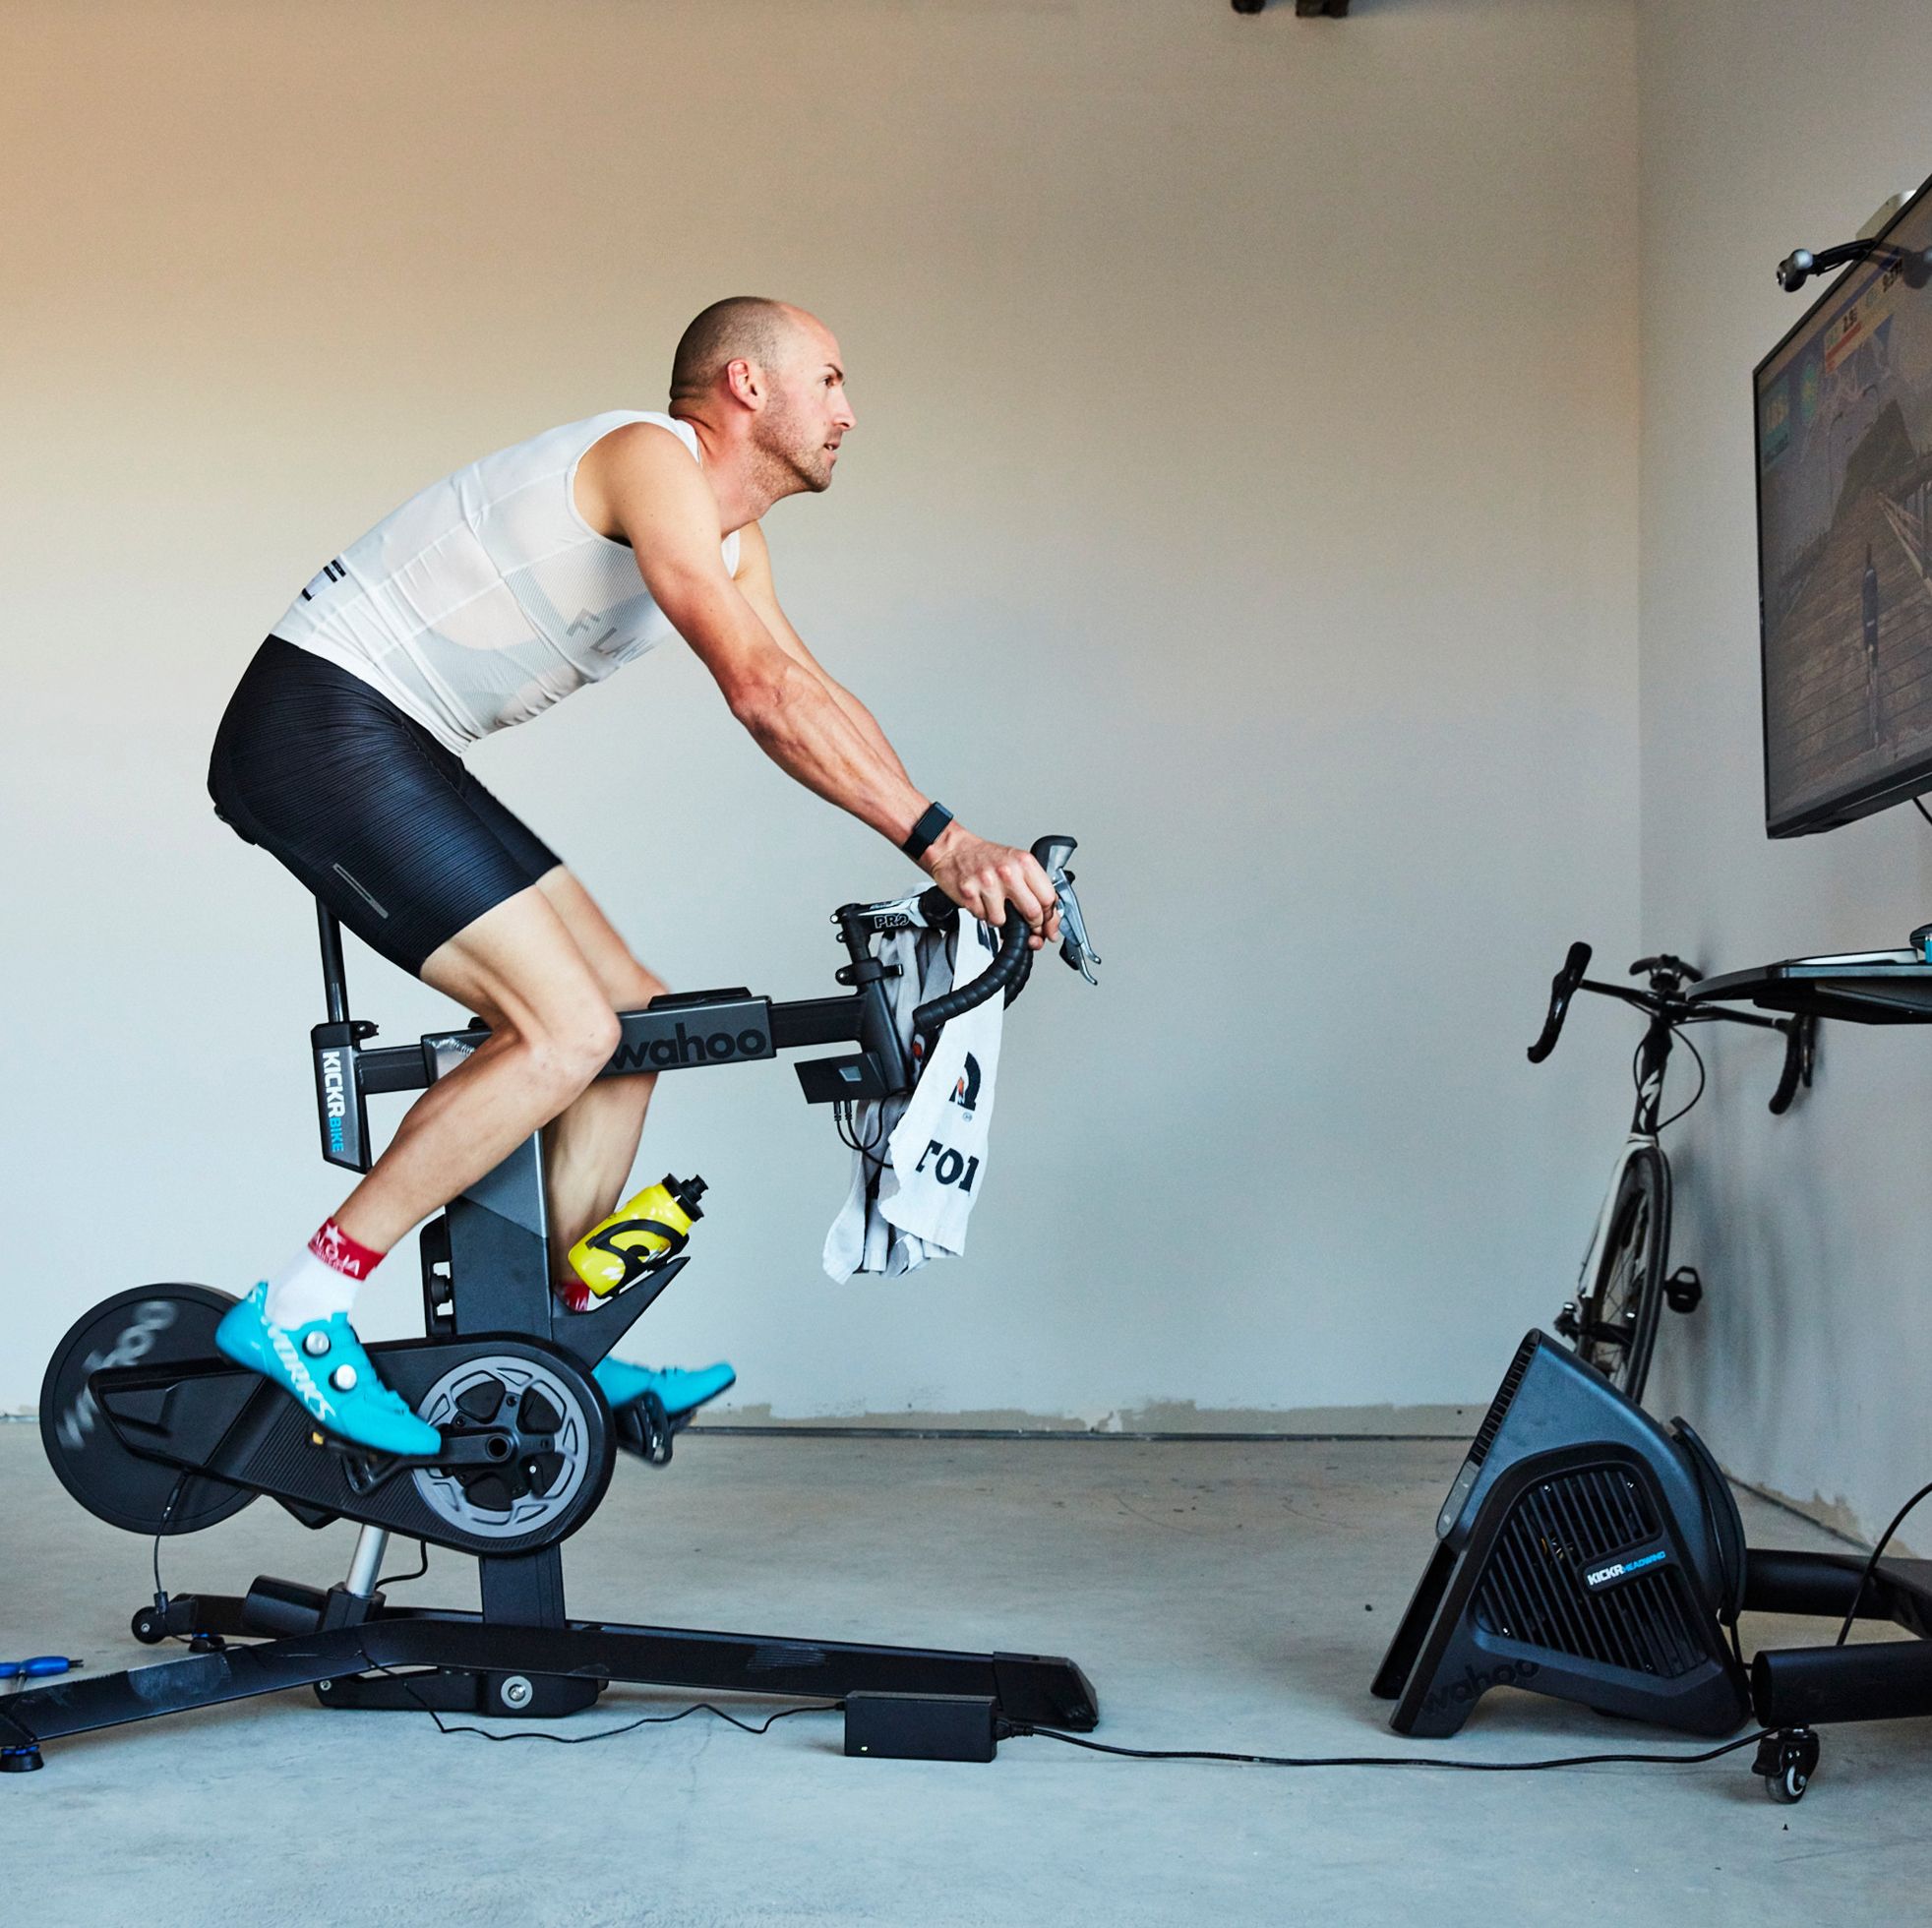 sit and spin exercise bike